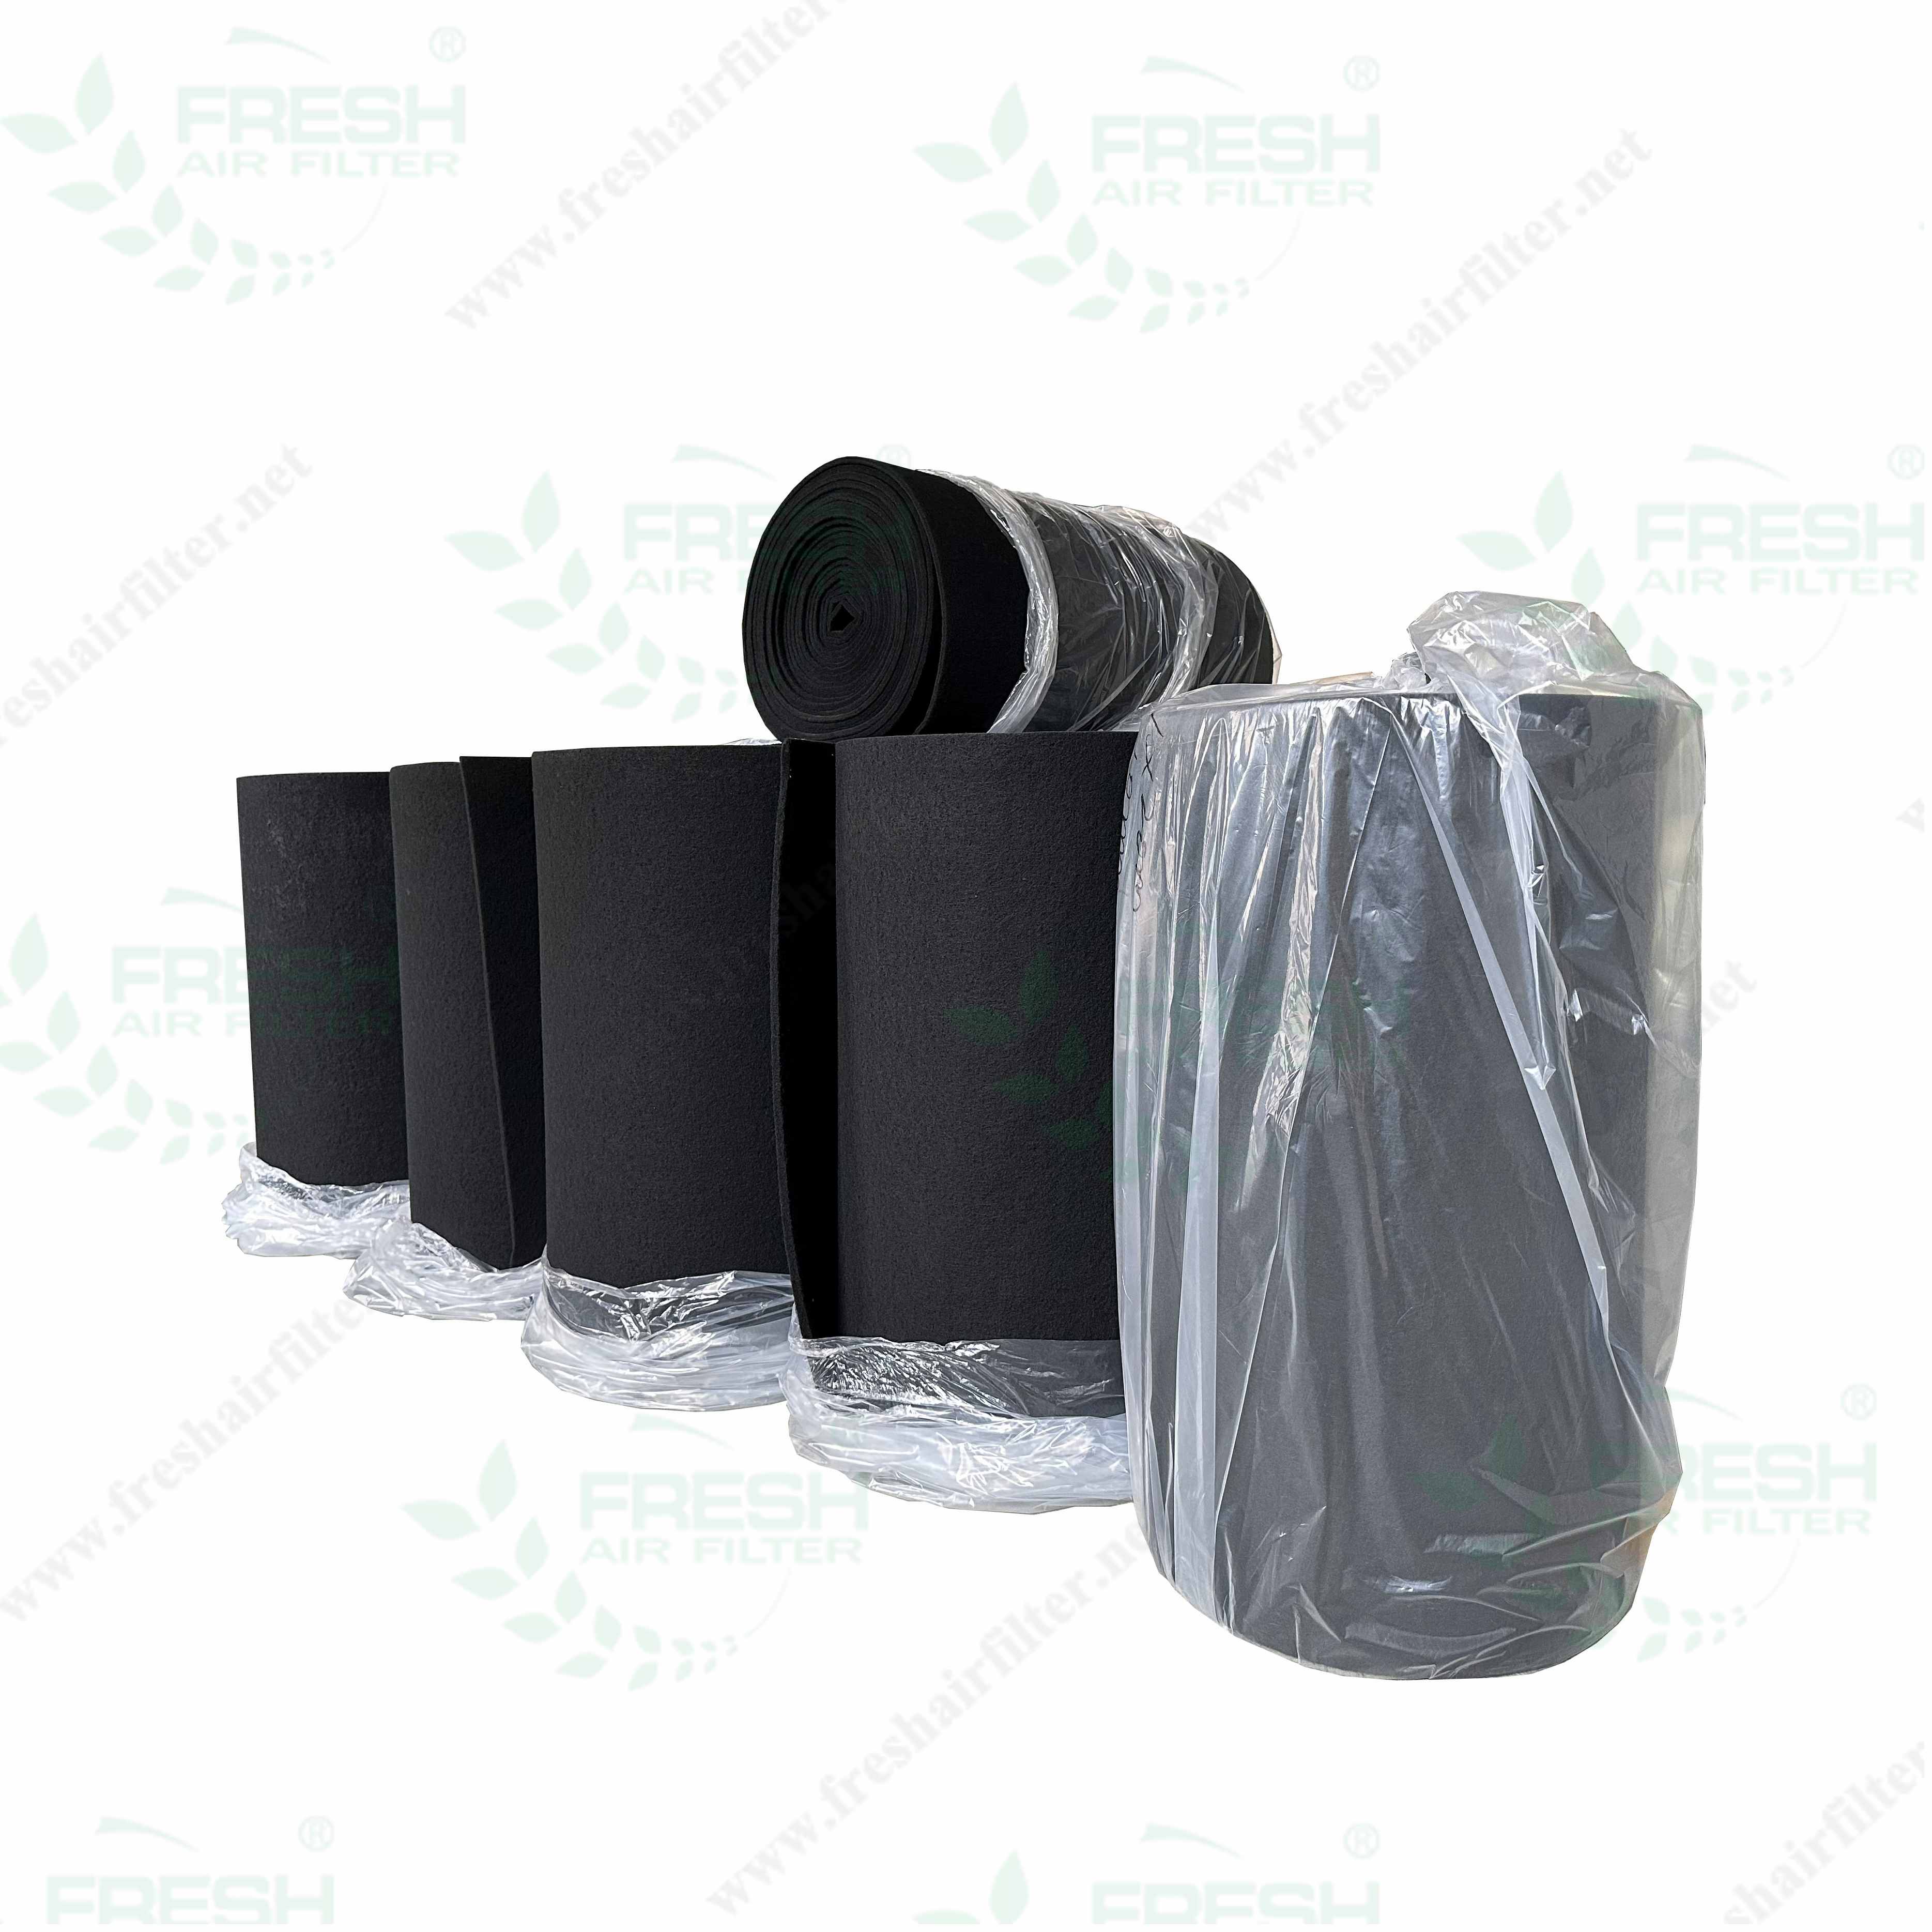 Activated carbon filter media (6)